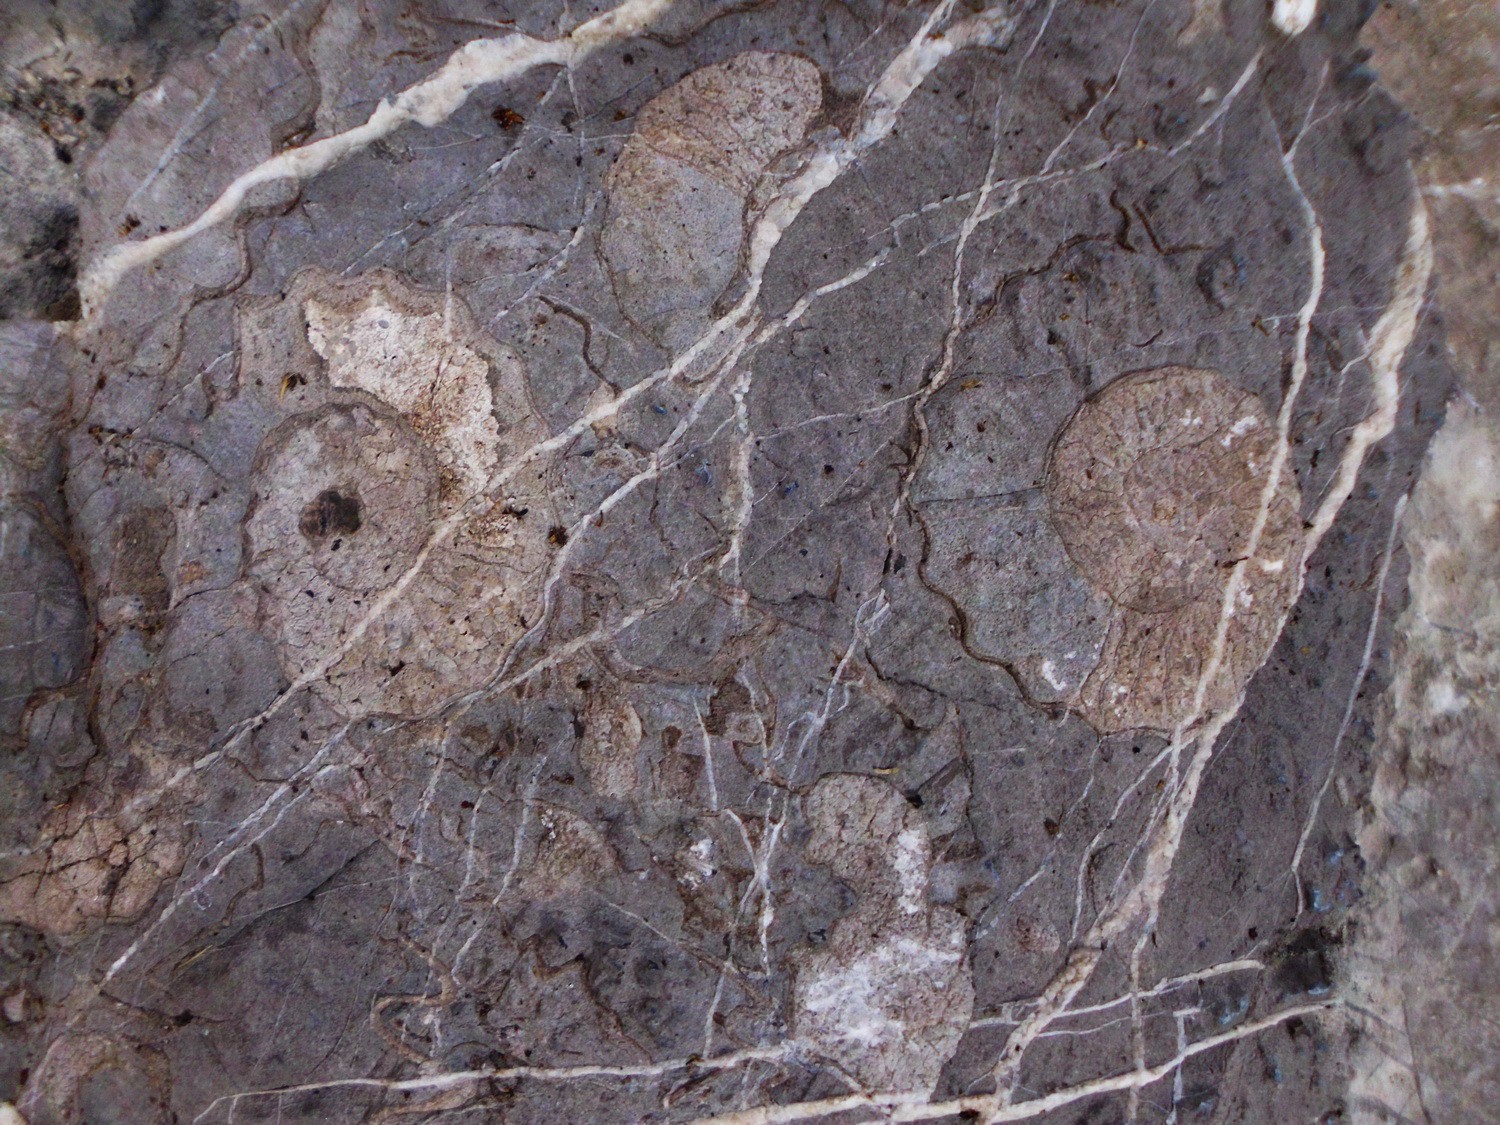 Detail of the fossils